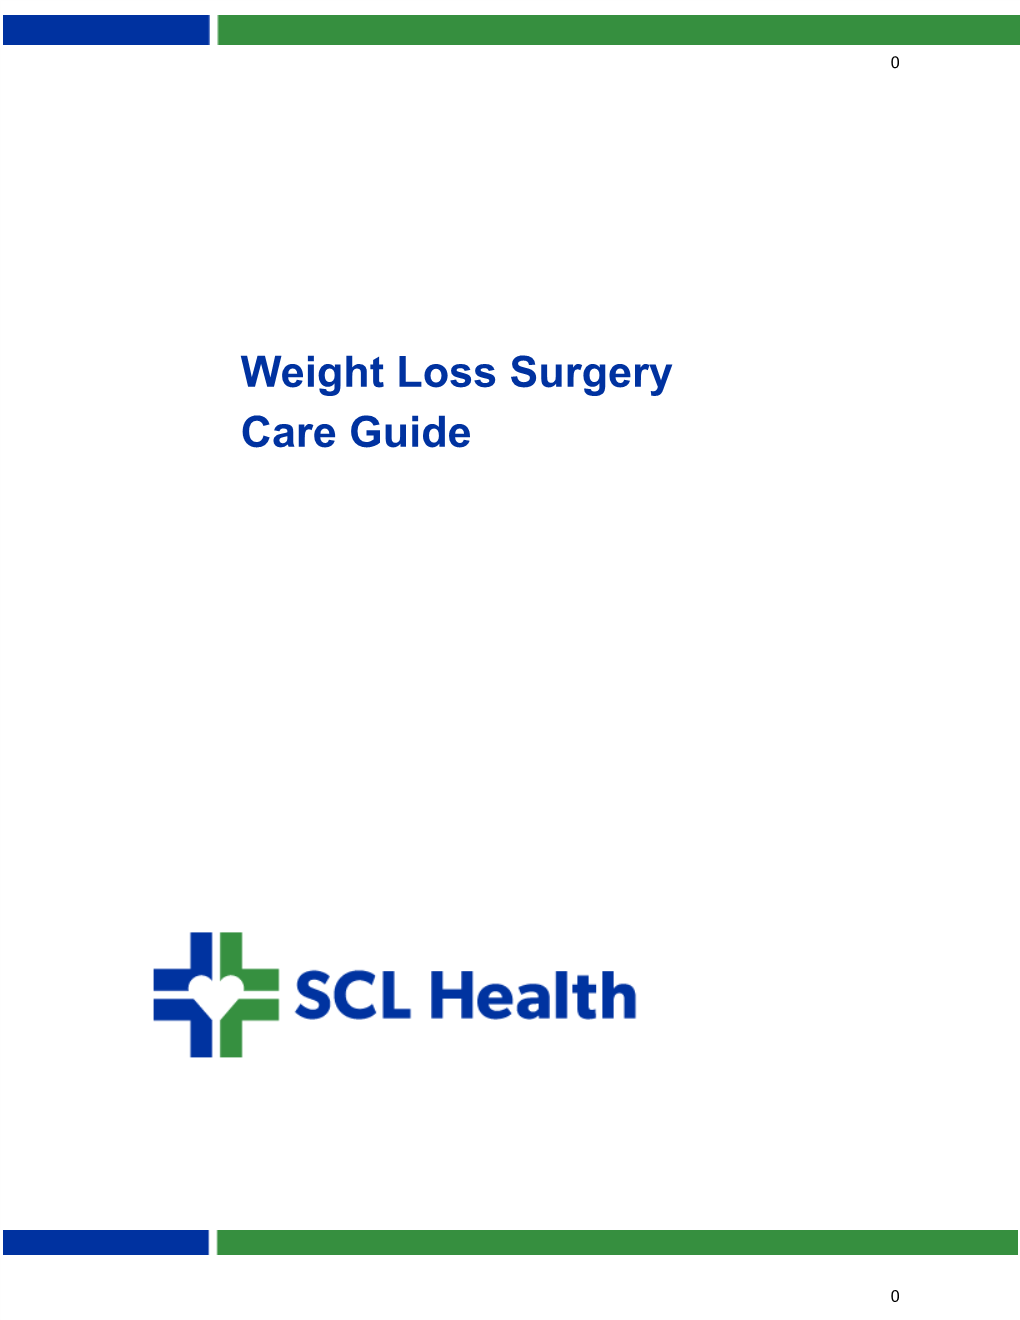 Weight Loss Surgery Care Guide